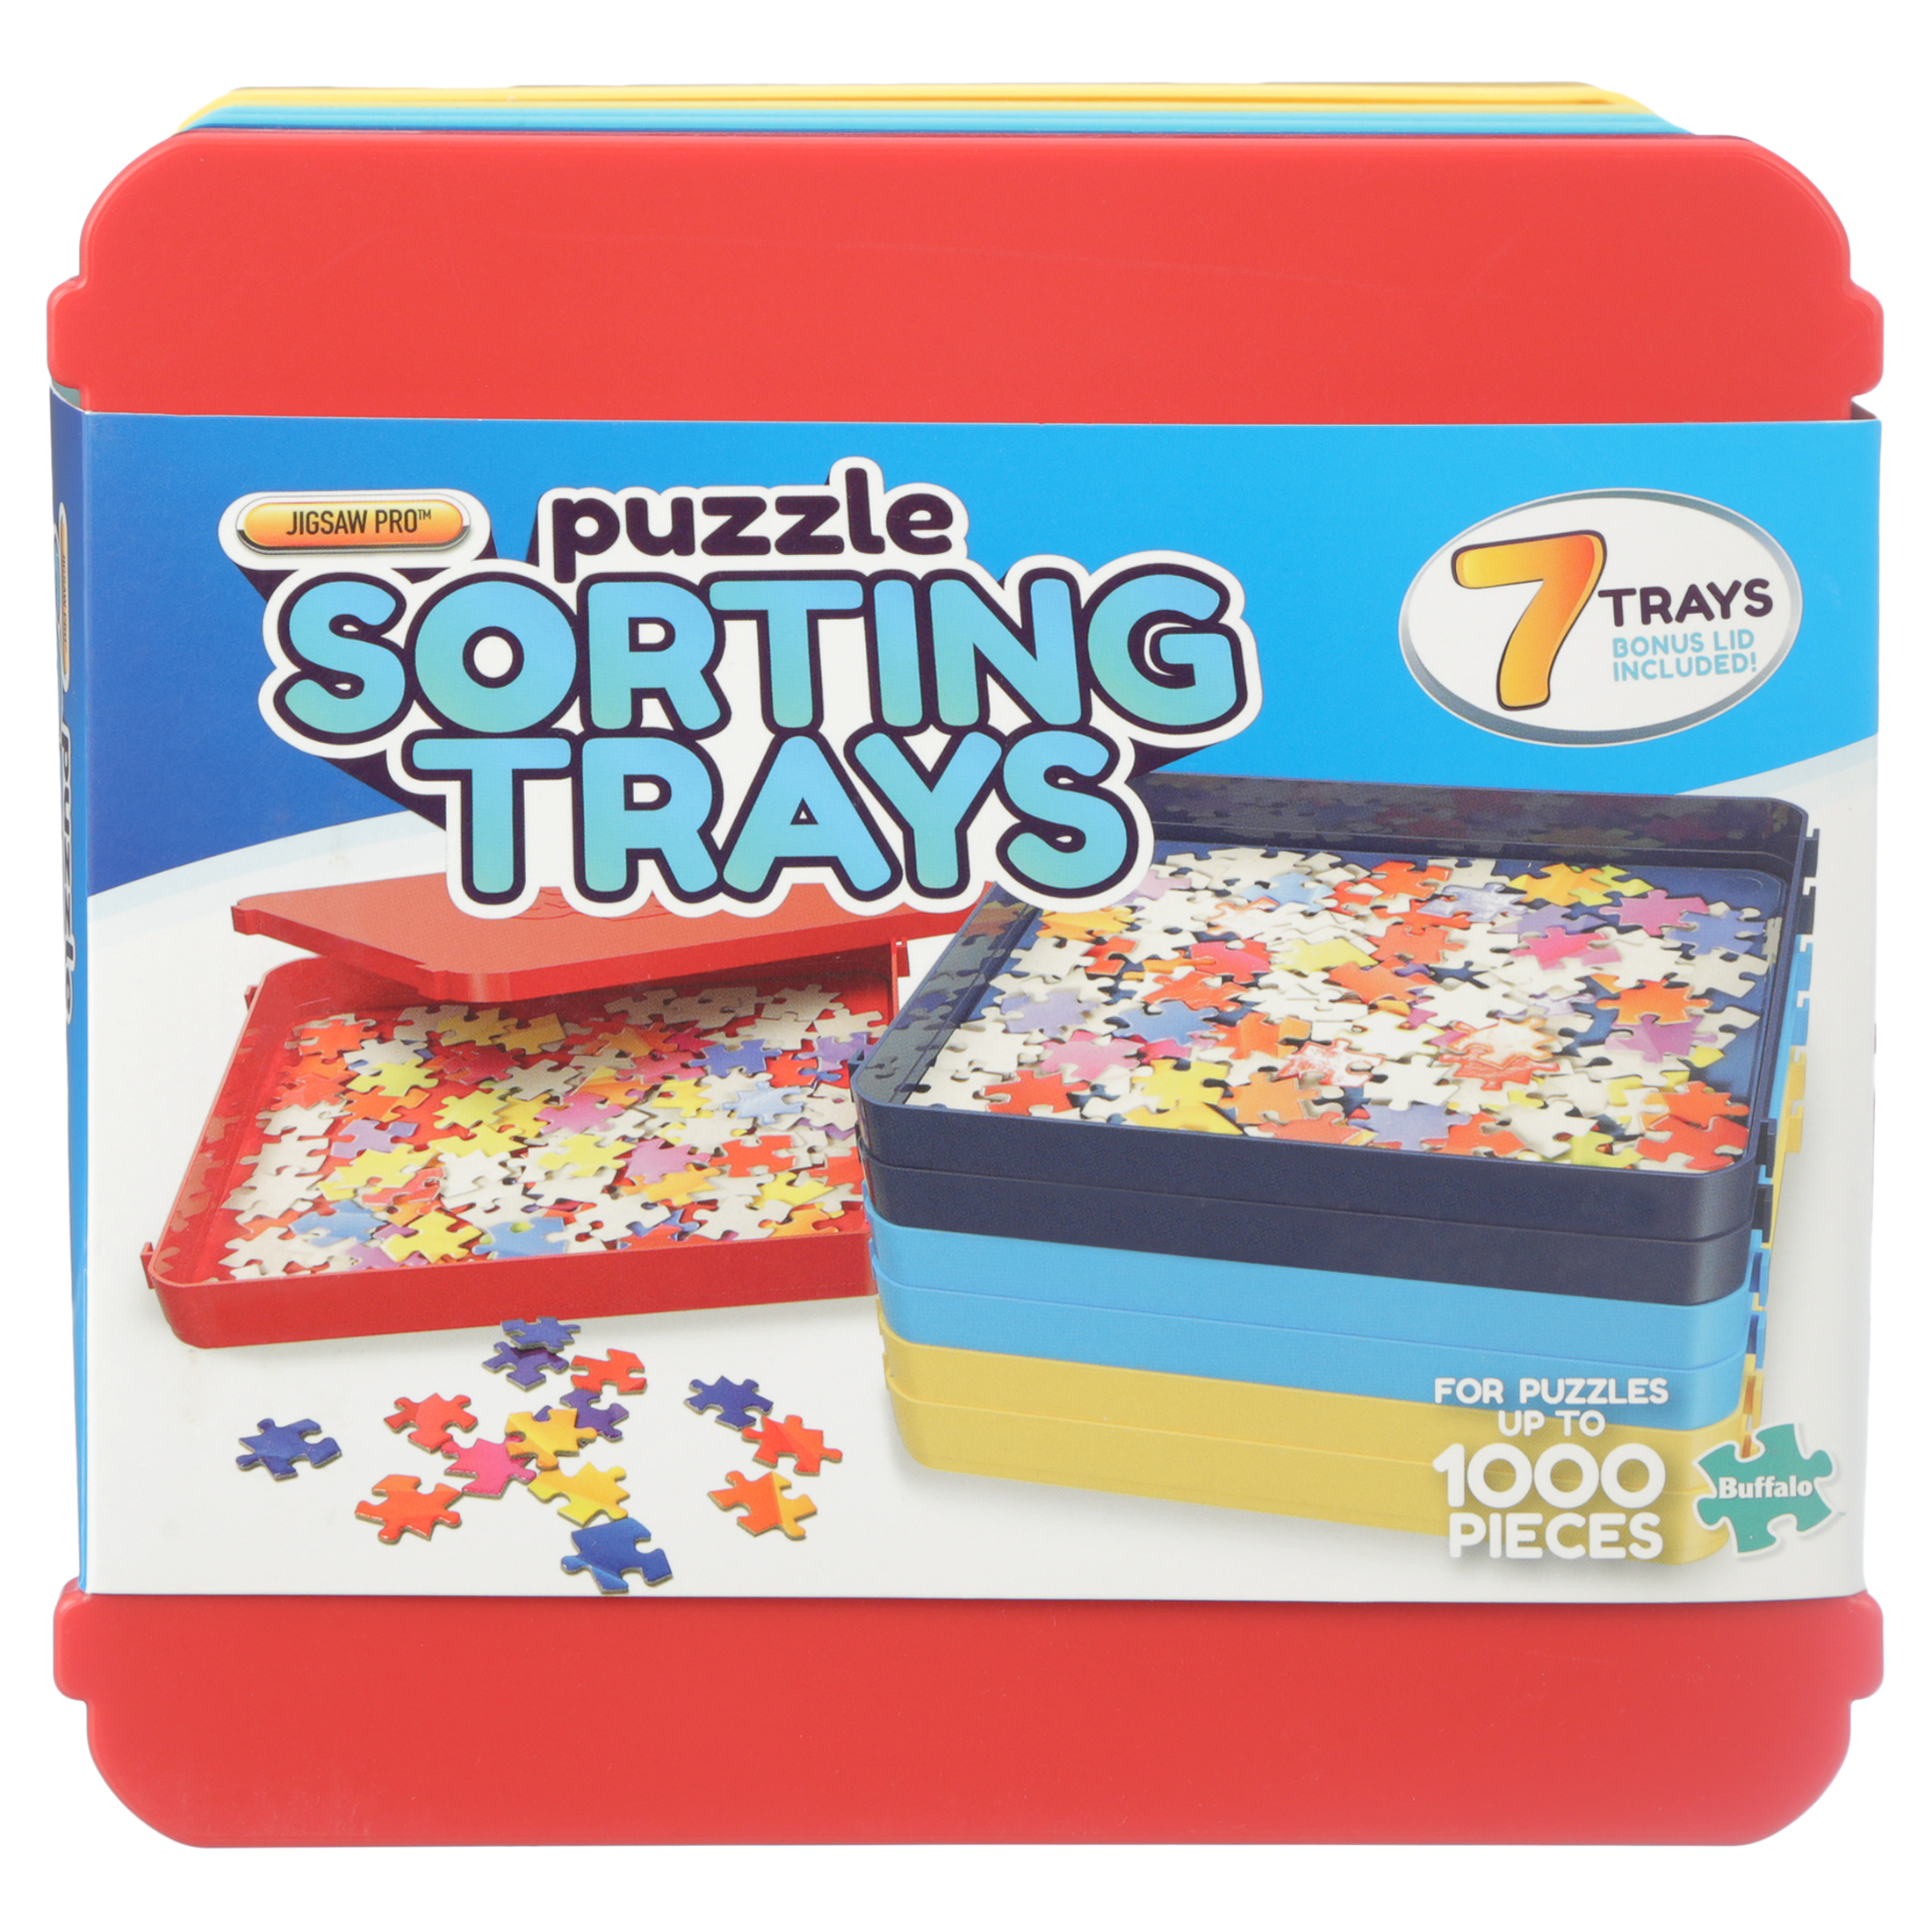 Jigsaw Pro™ Puzzle Sorting Trays from Buffalo Games 